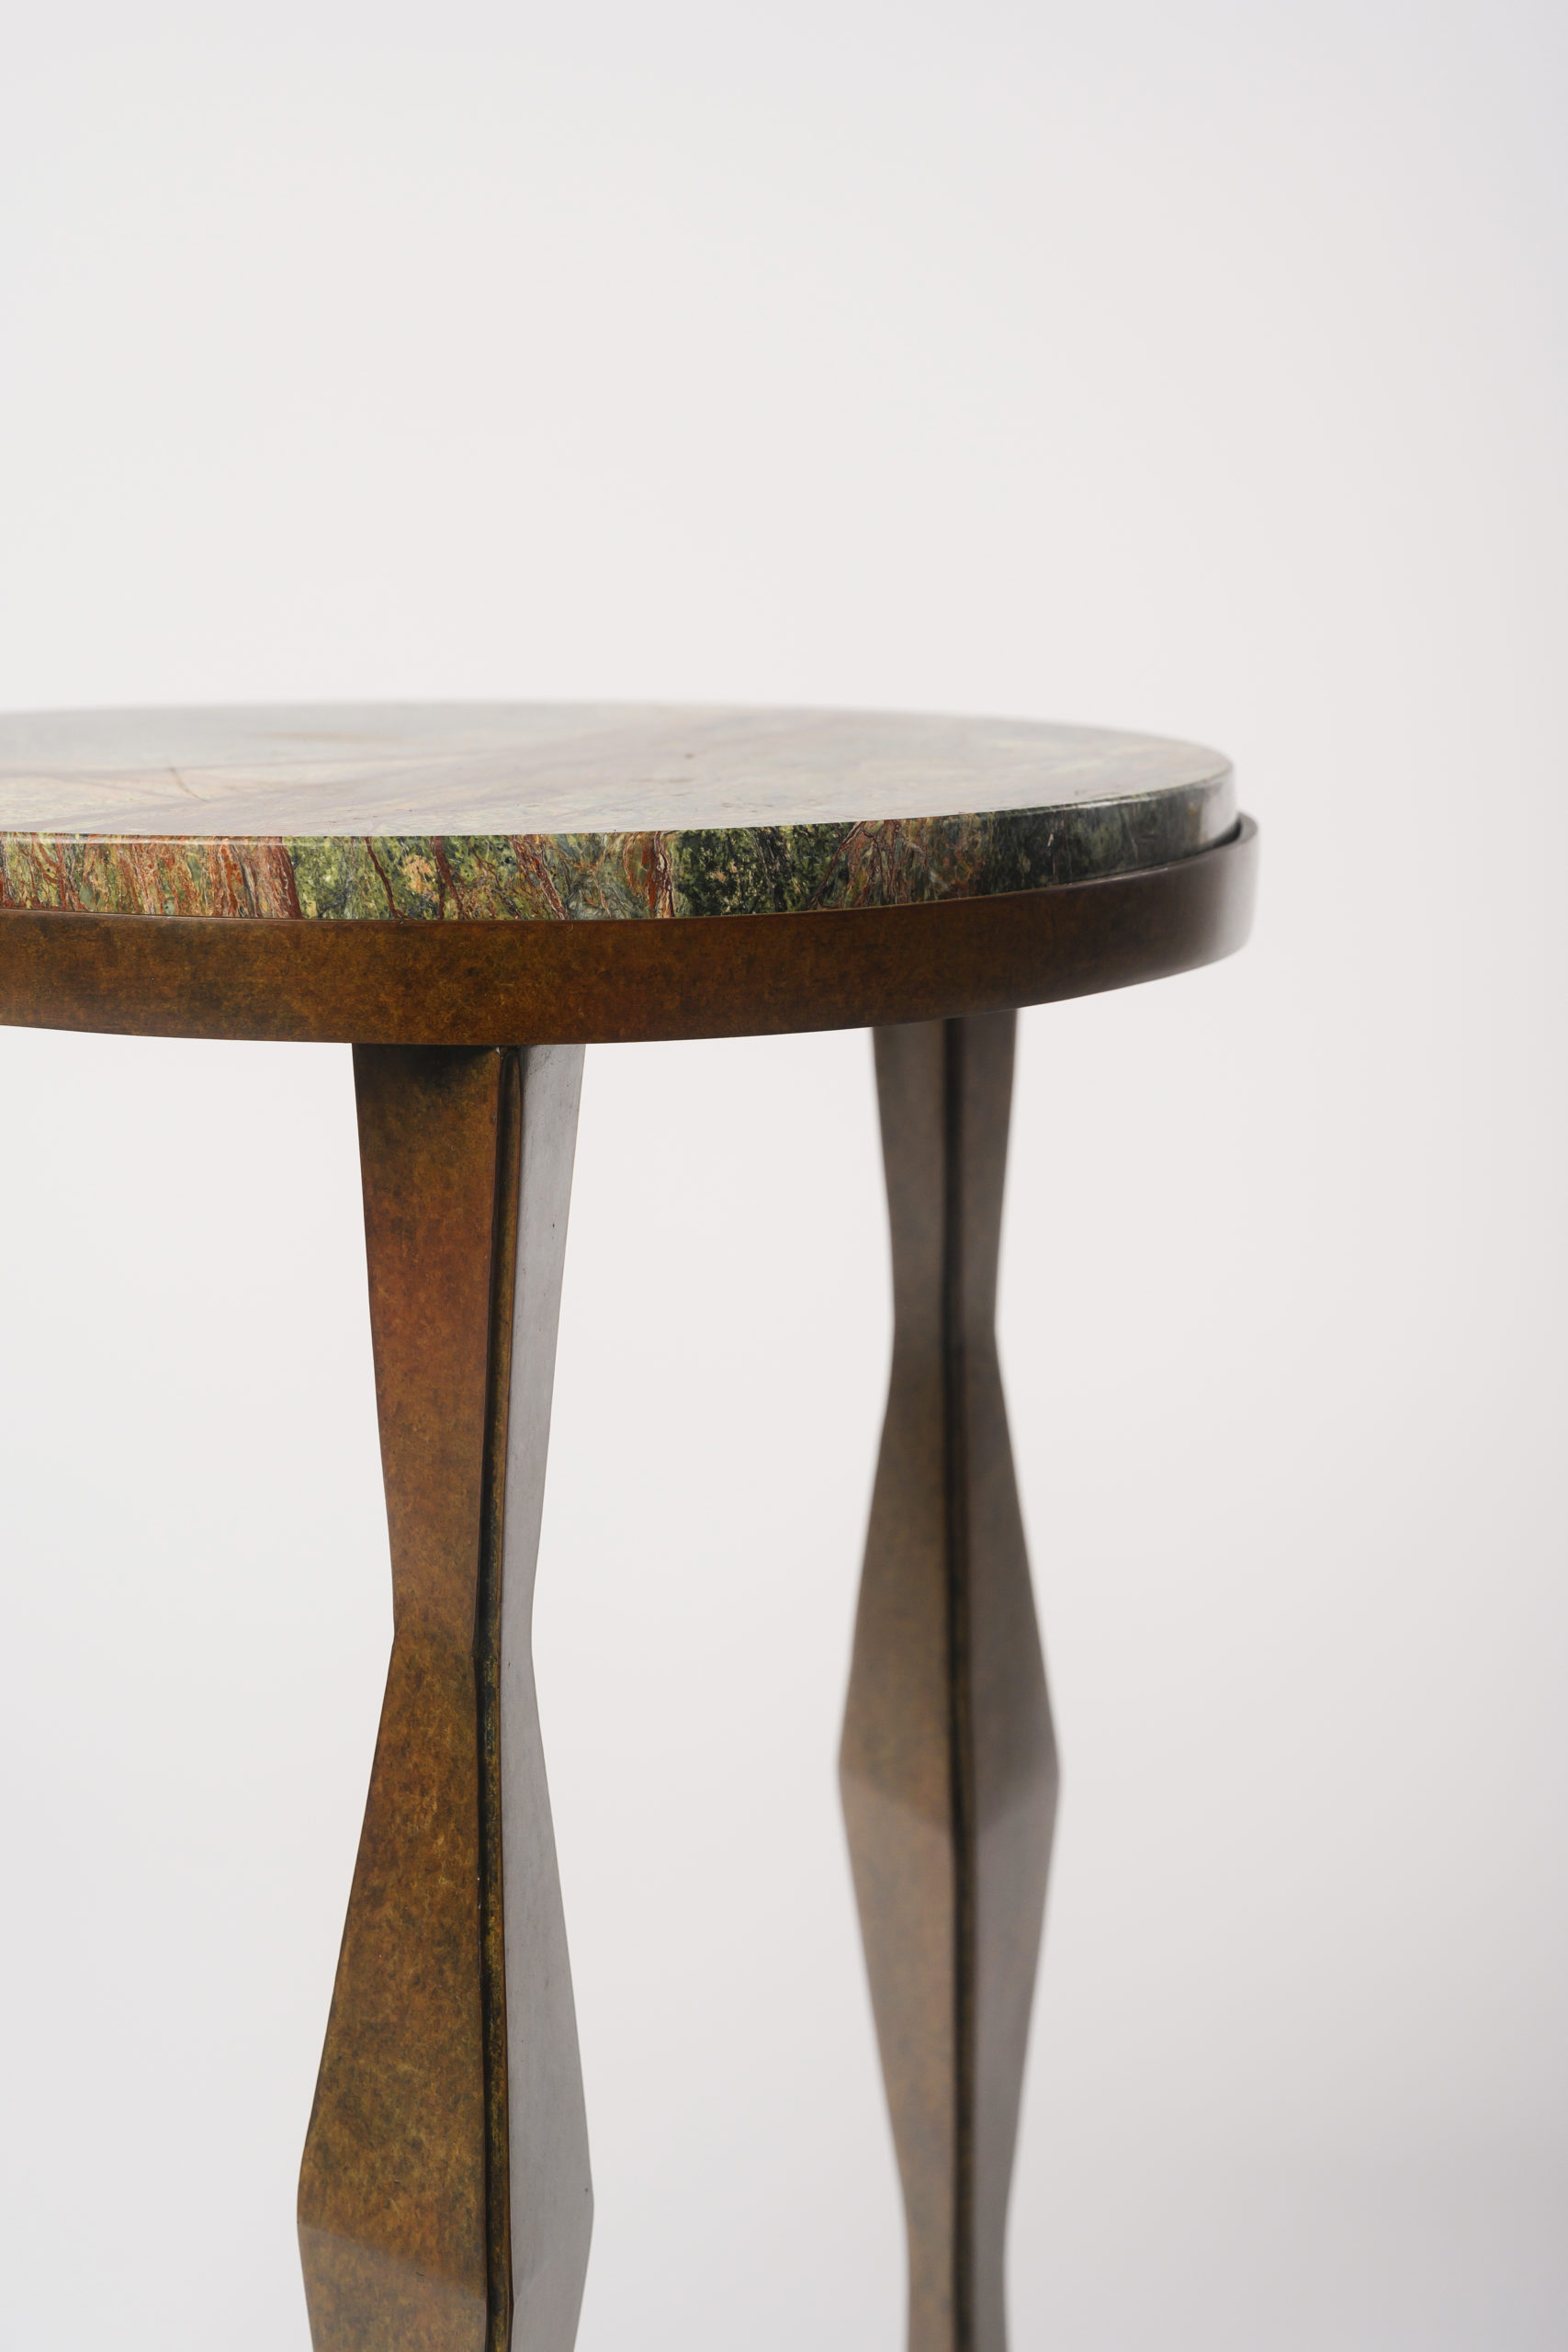 NYDC_WNWN_products_david_sutherland_Arthur_side_table_BEE_4967